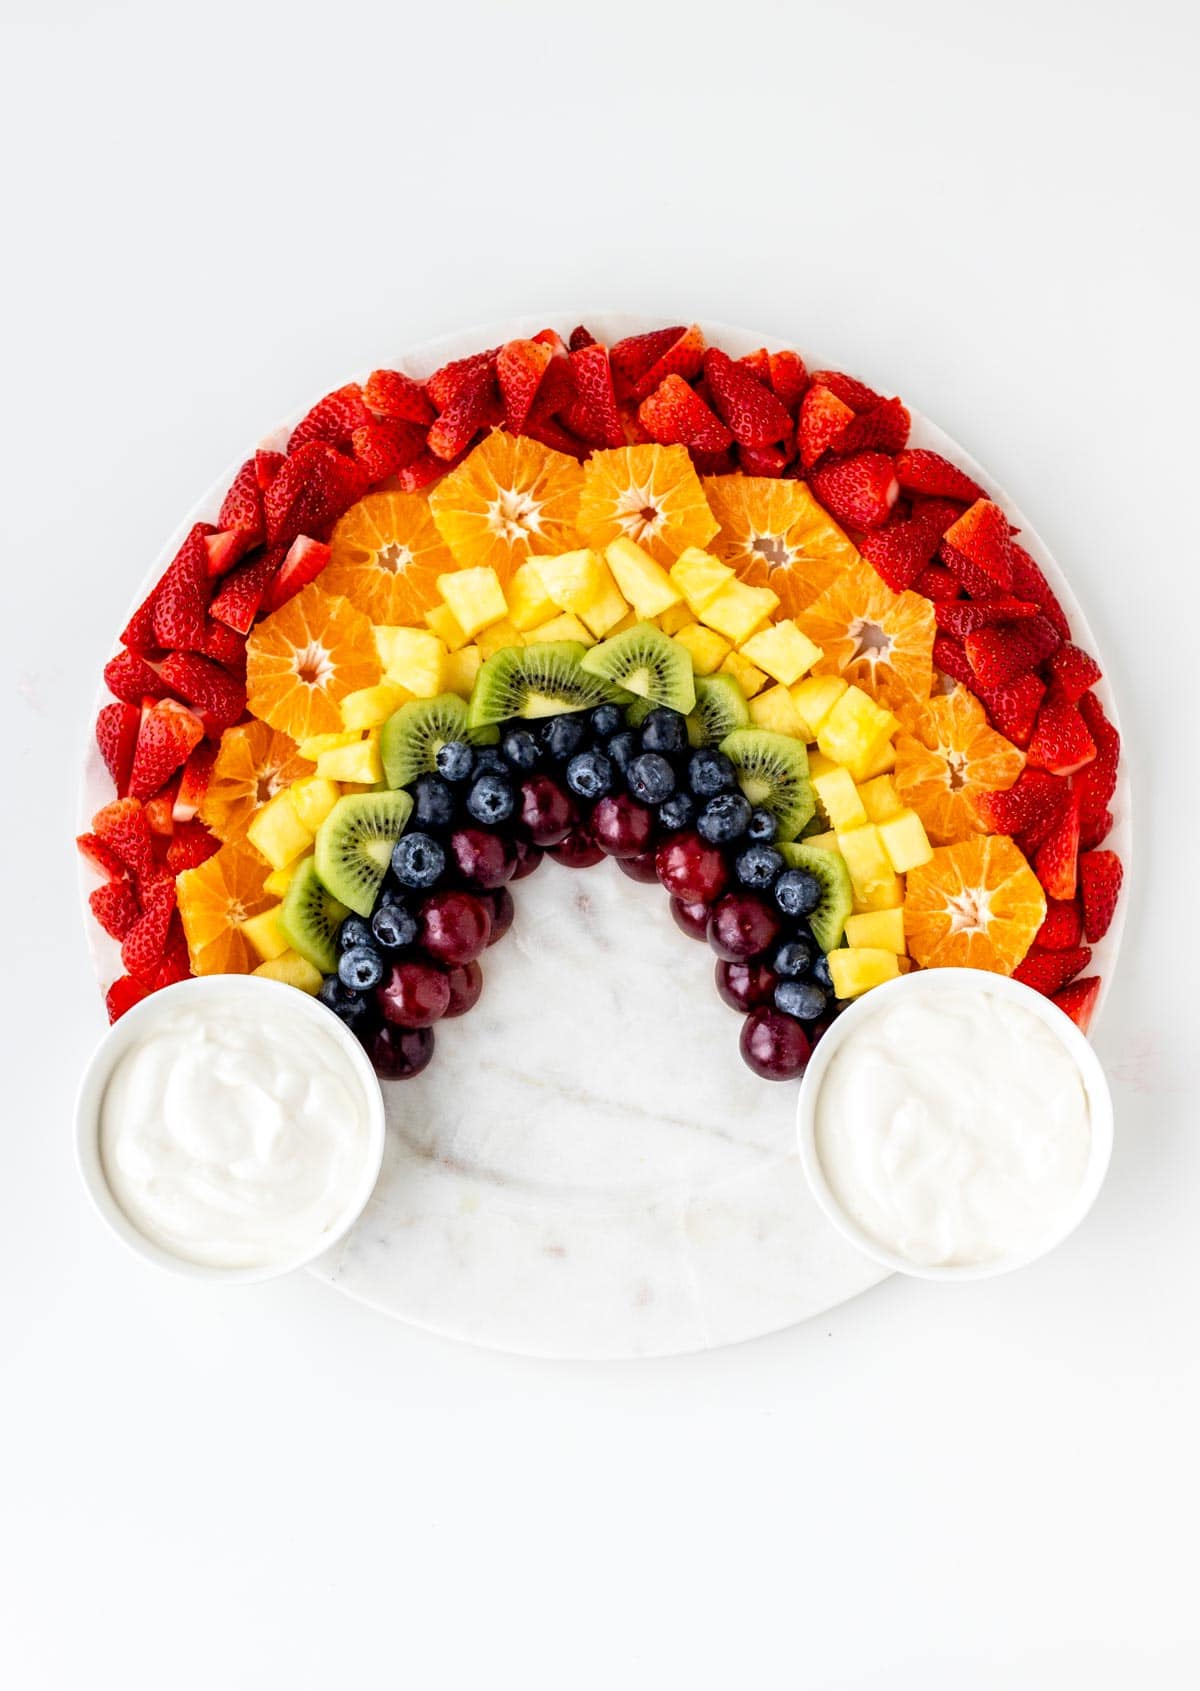 A birds-eye view of a fully assembled rainbow fruit board with two bowls of yogurt dip on each side.